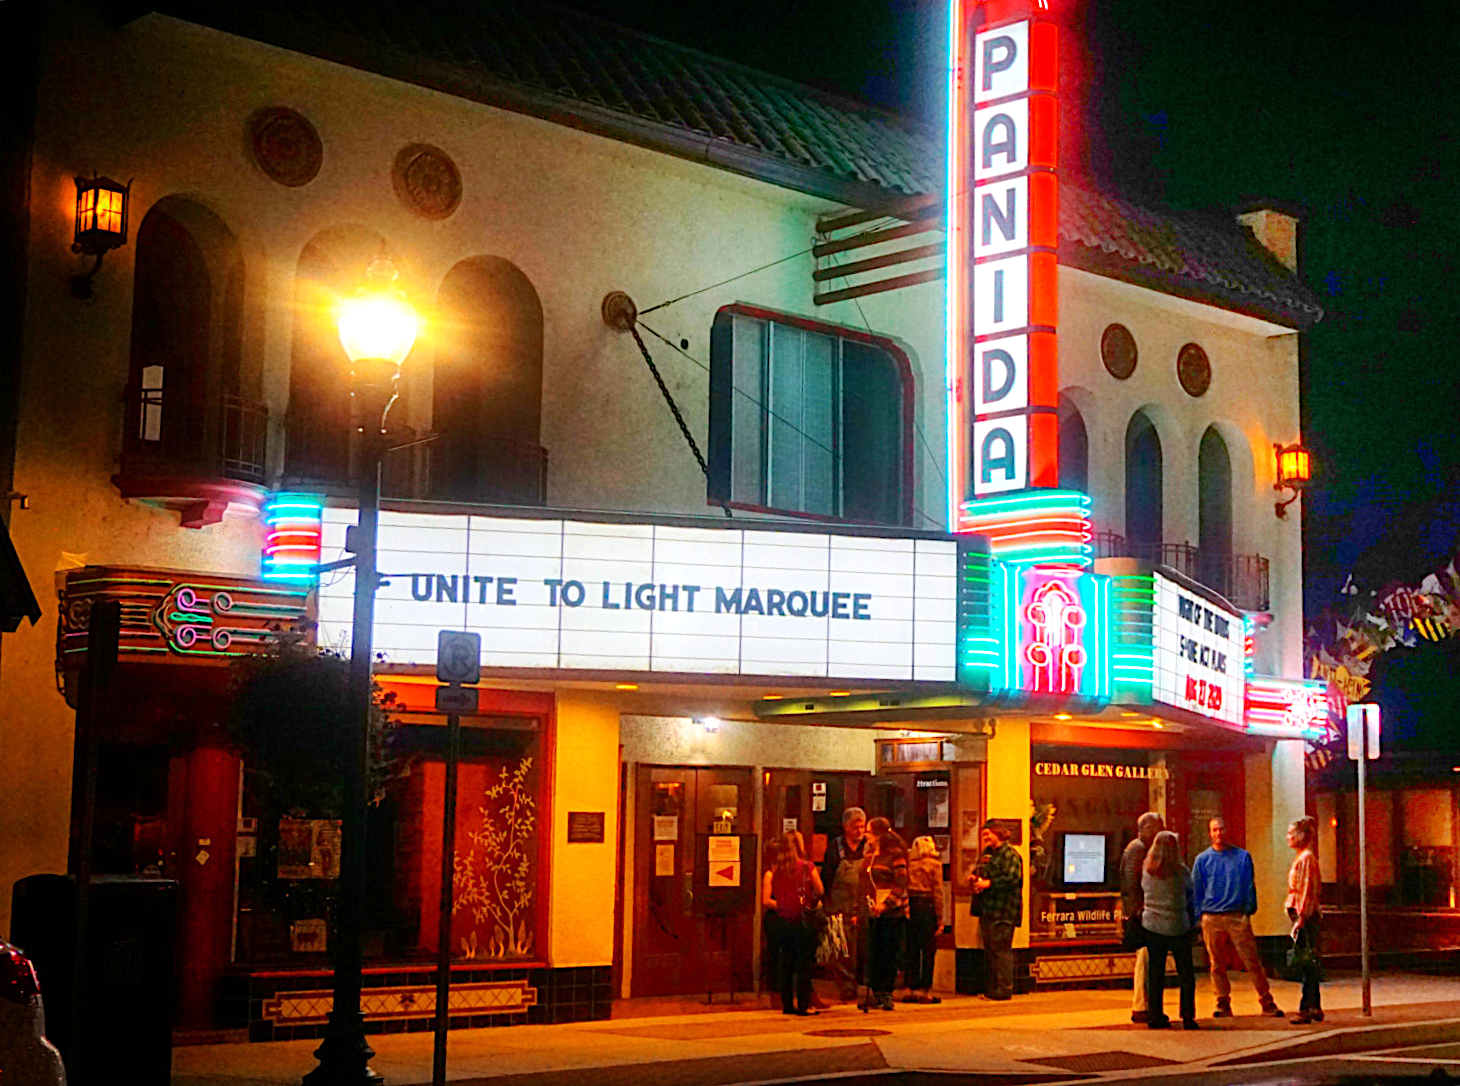 The newly restored marquee at the Panida Theater